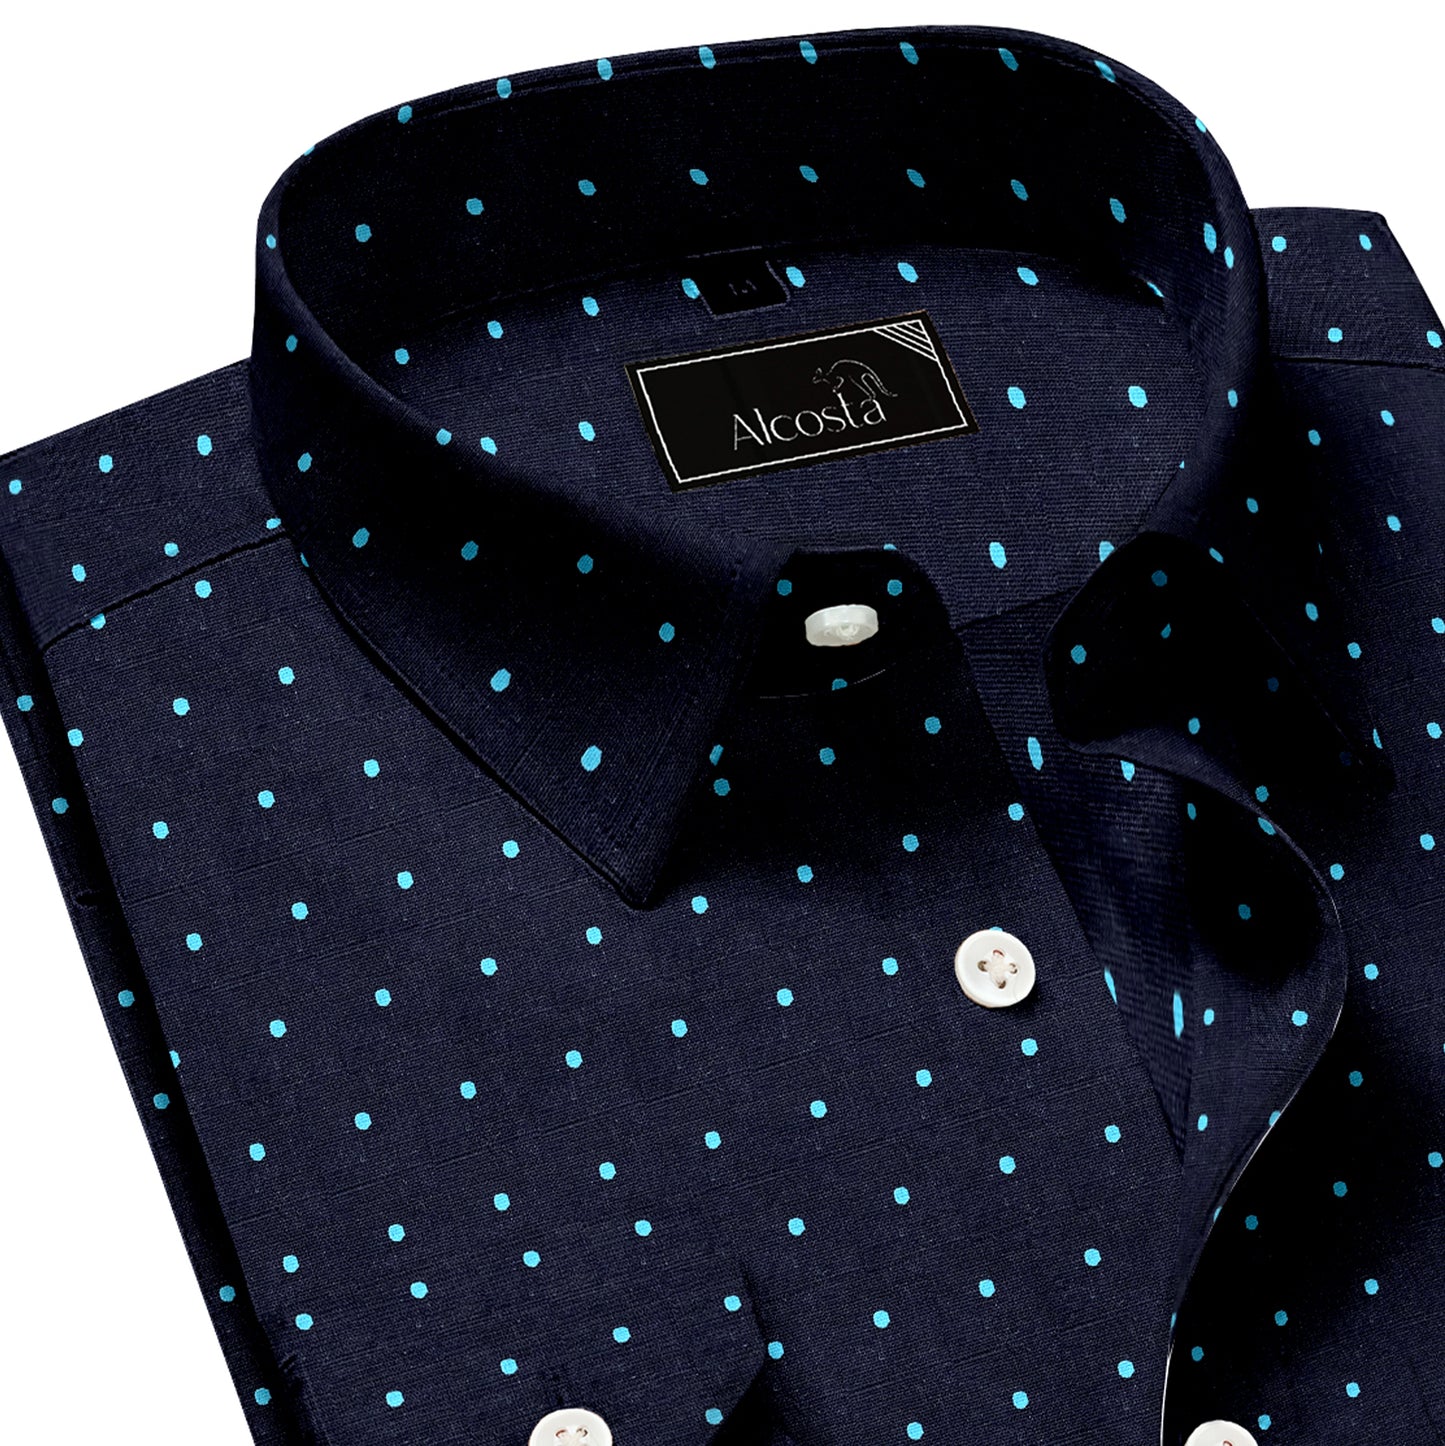 MIDNIGHT BLUE WITH POLKA DOTTED COTTON SHIRT.